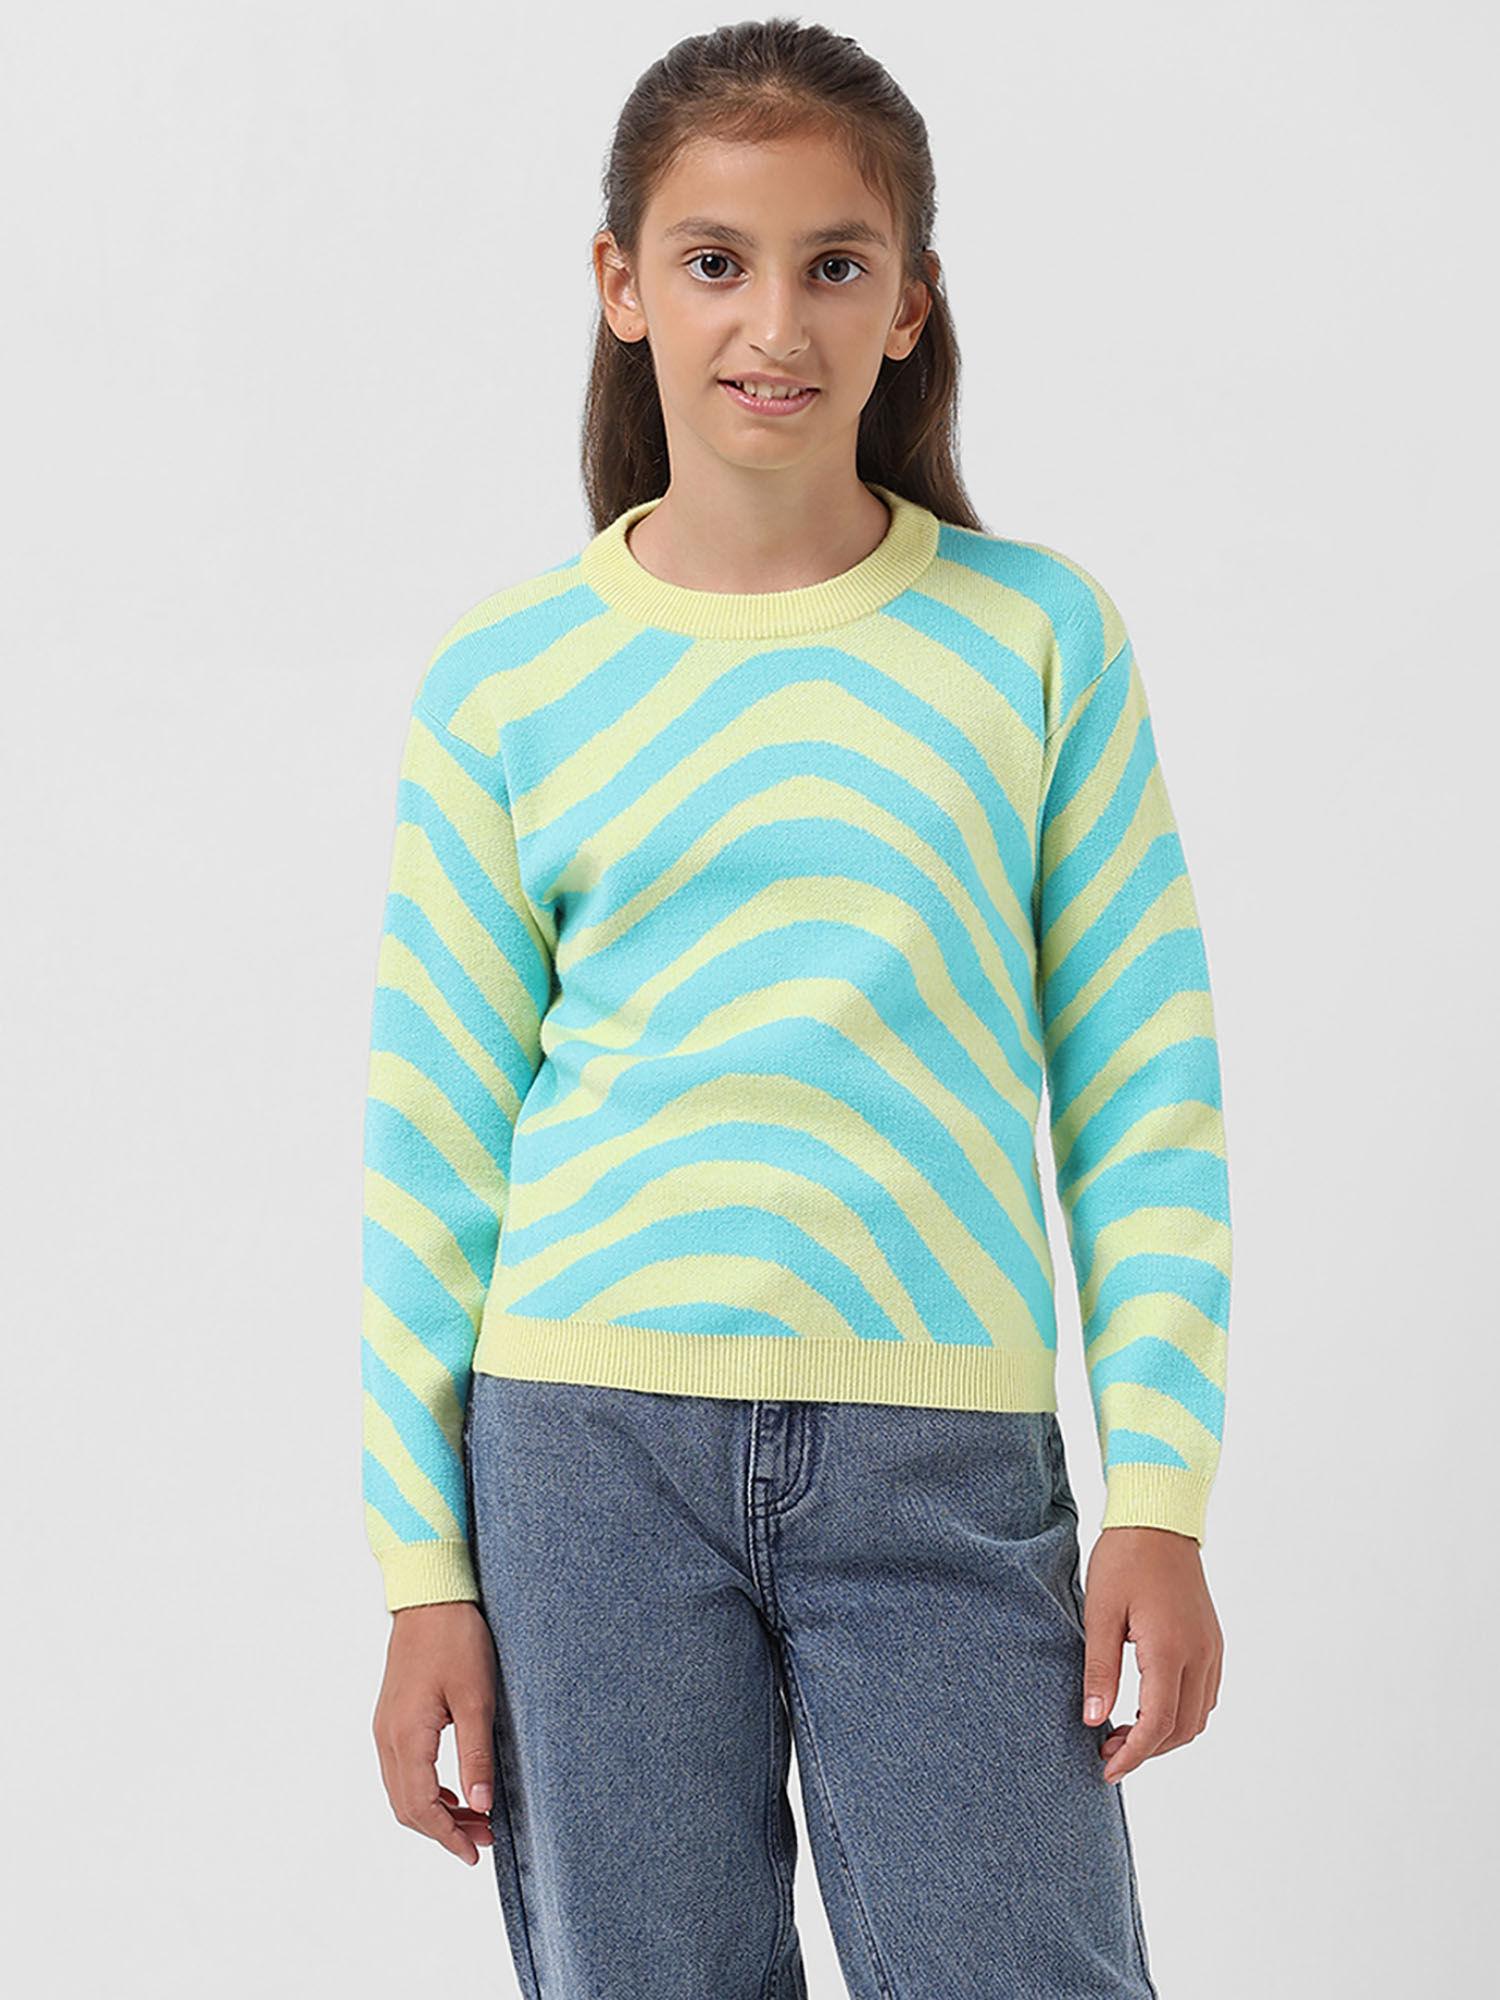 Girls Abstract Print Blue Sweater